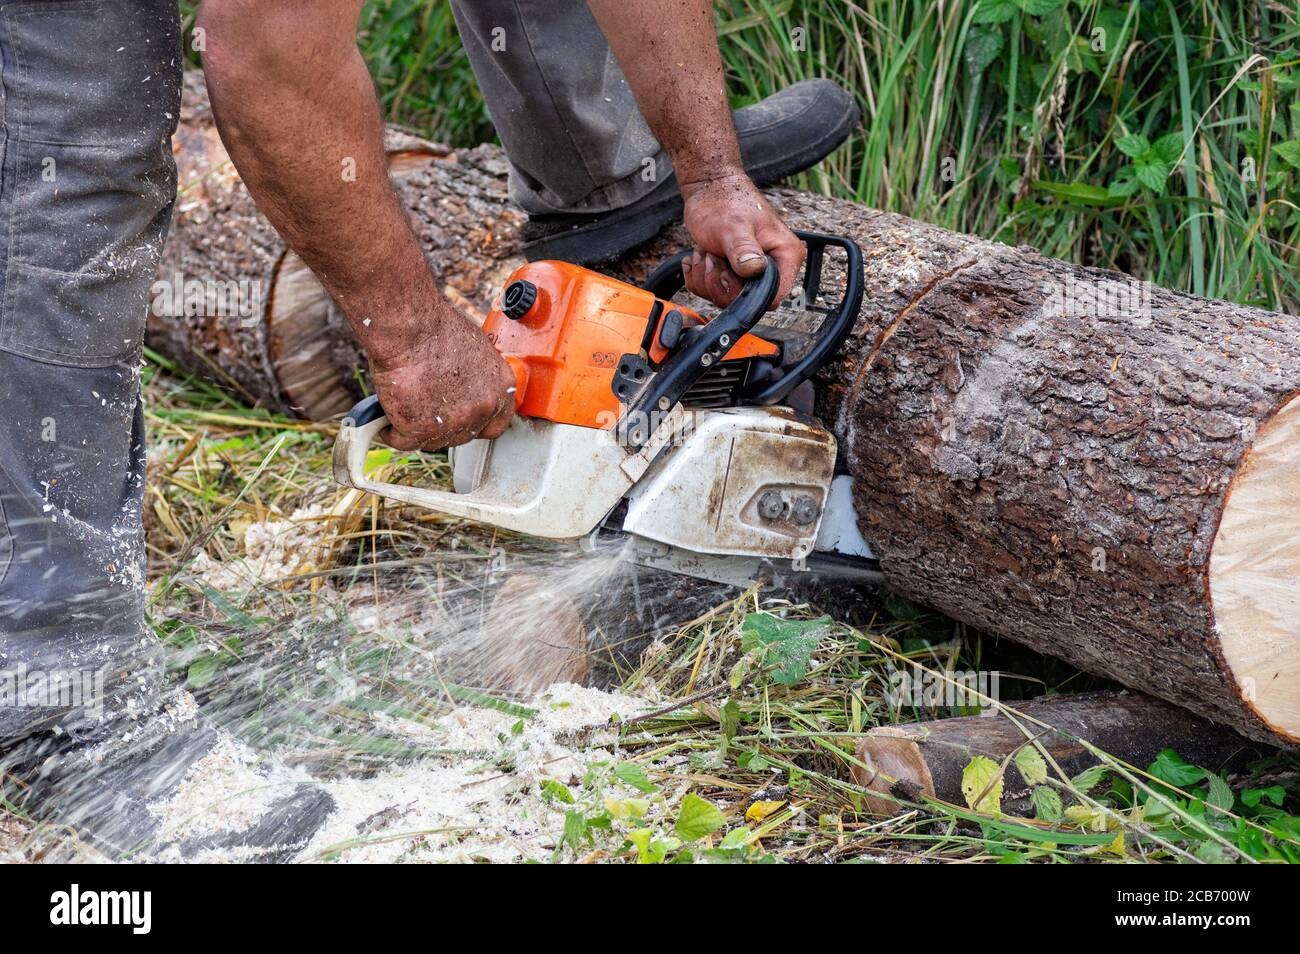 Chainsaw in motion. Hard wood working in forest. Sawdust fly around. Close up. Stock Photo